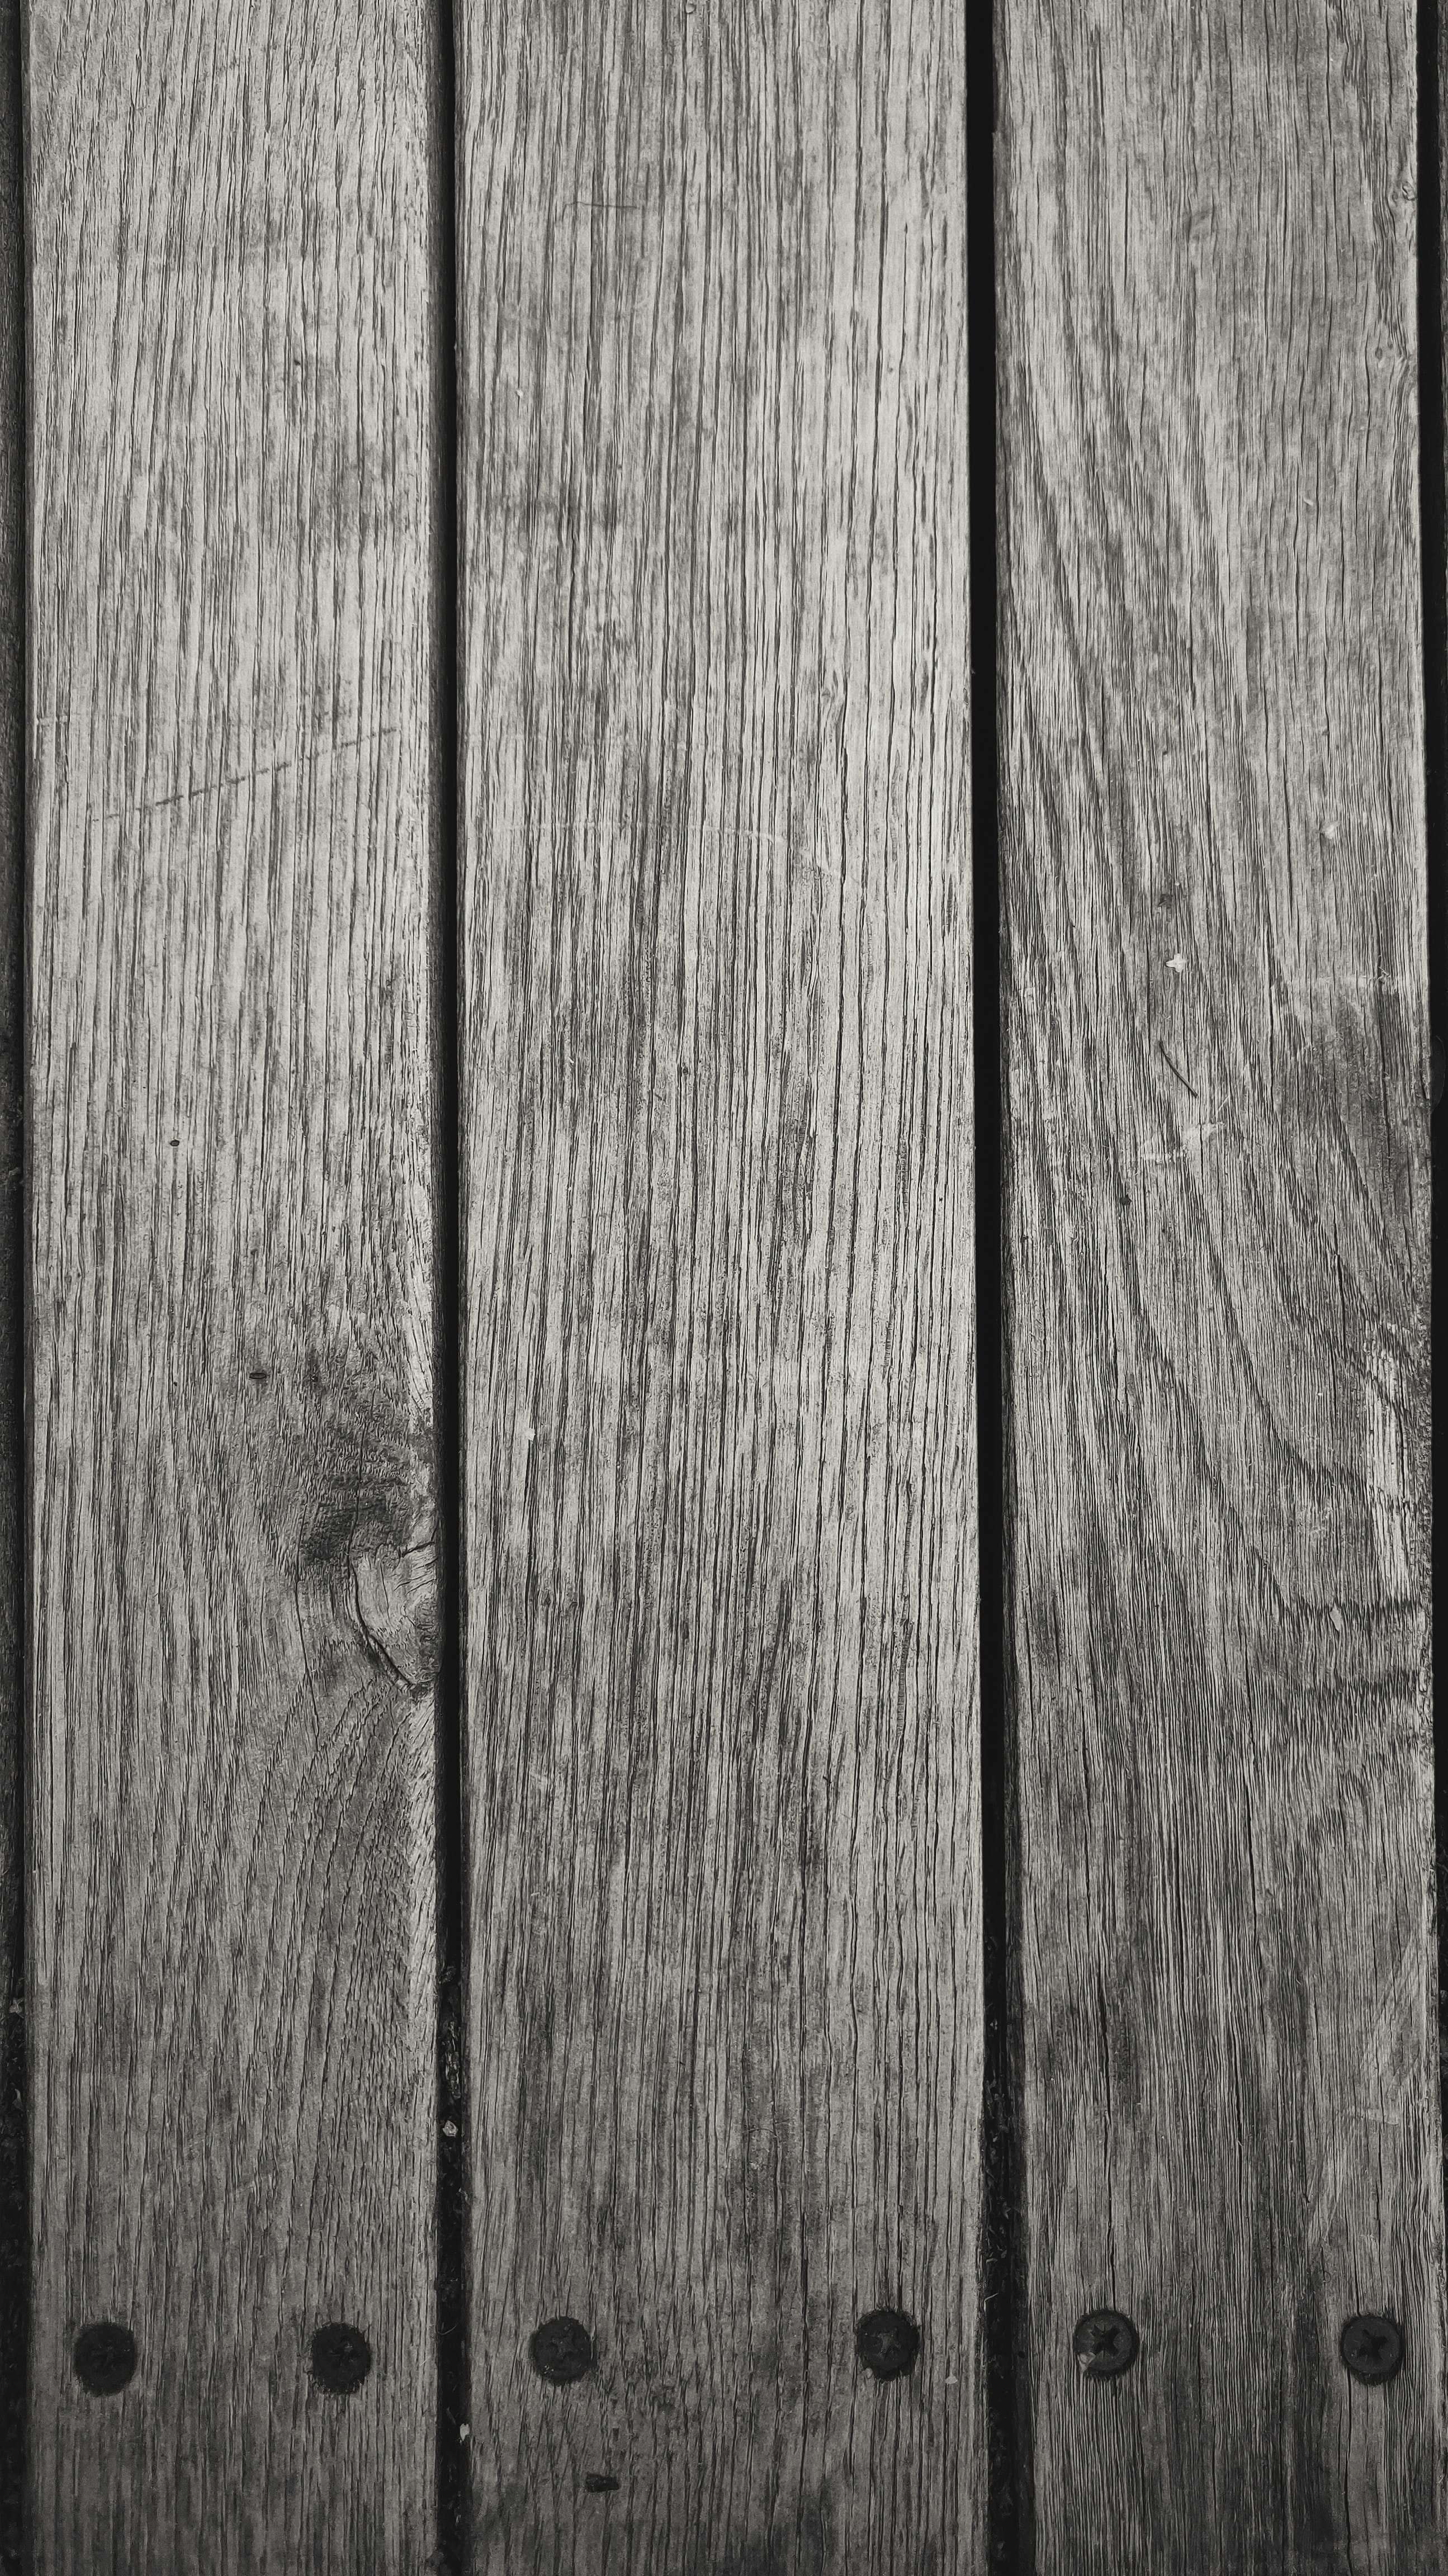 wood, wooden, texture, textures, surface, bw, chb, planks, board